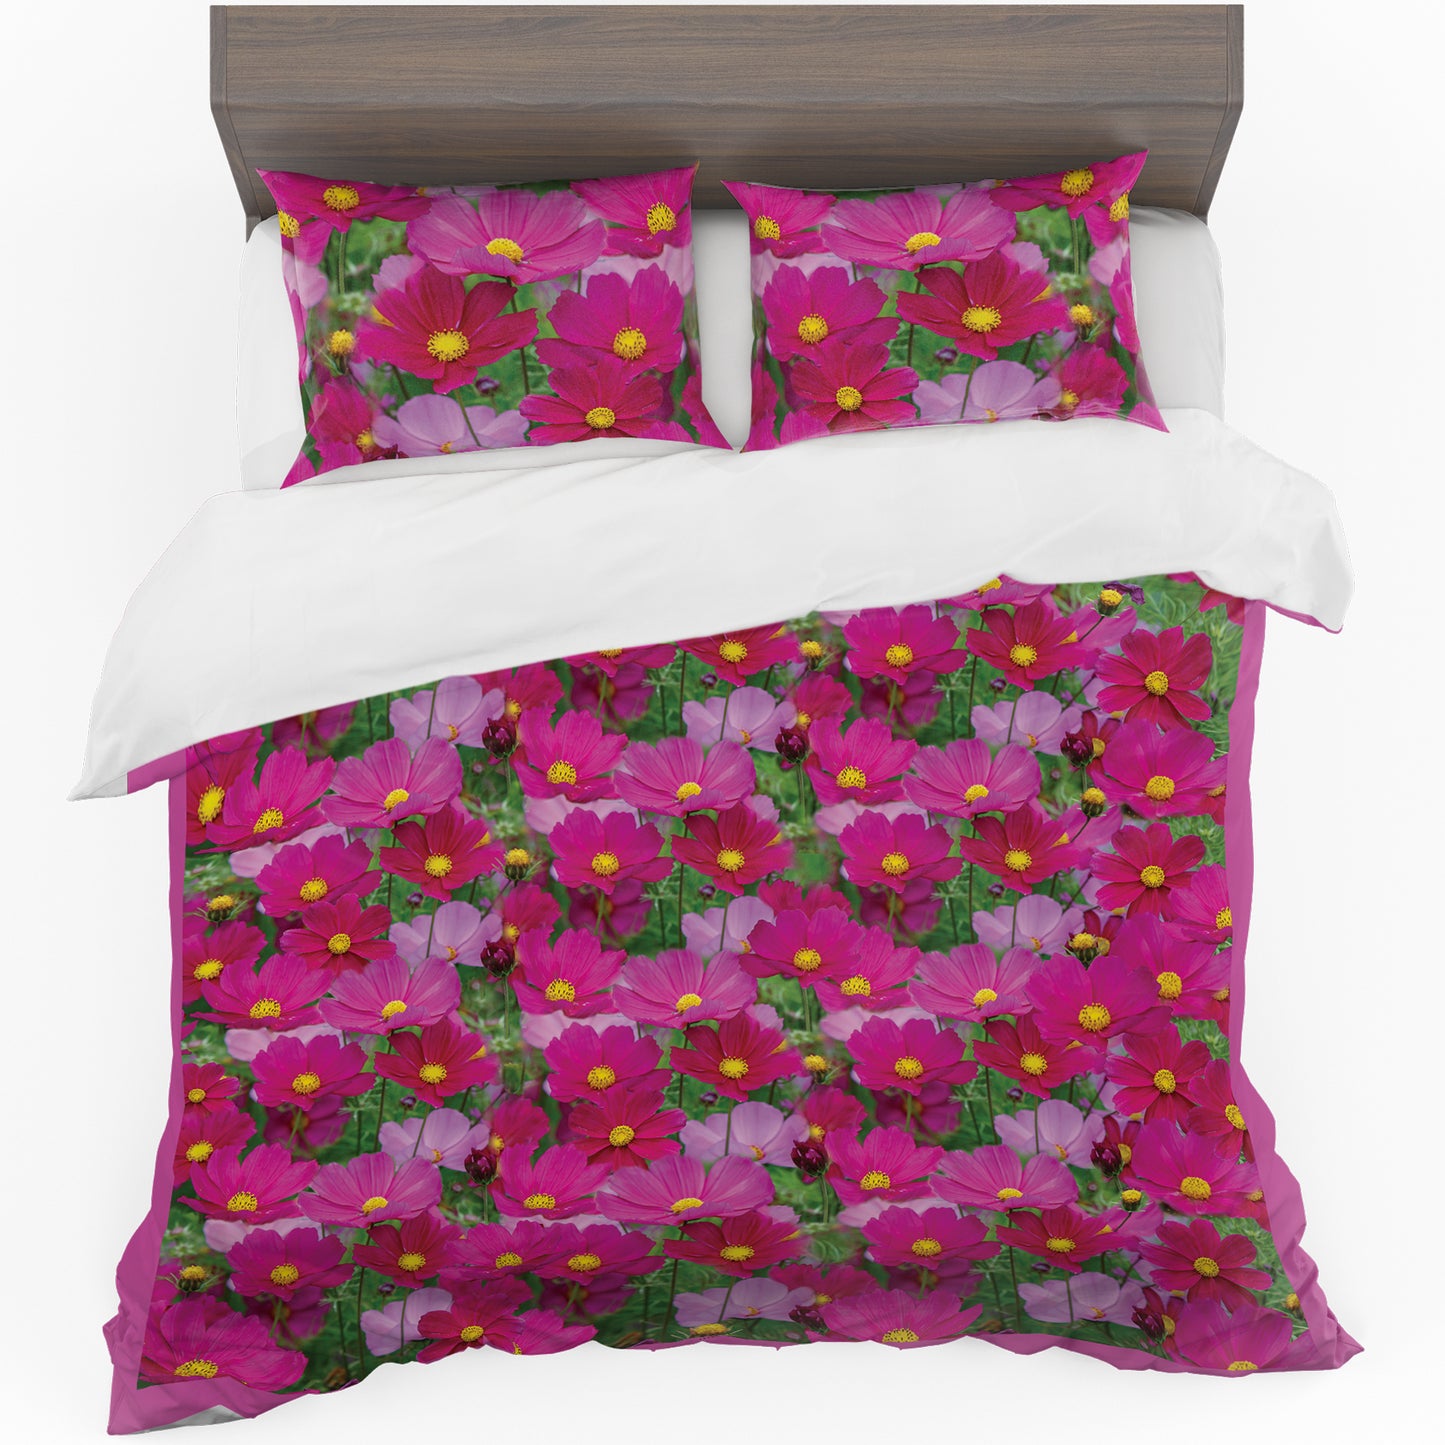 Pink Cosmos Duvet Cover Set